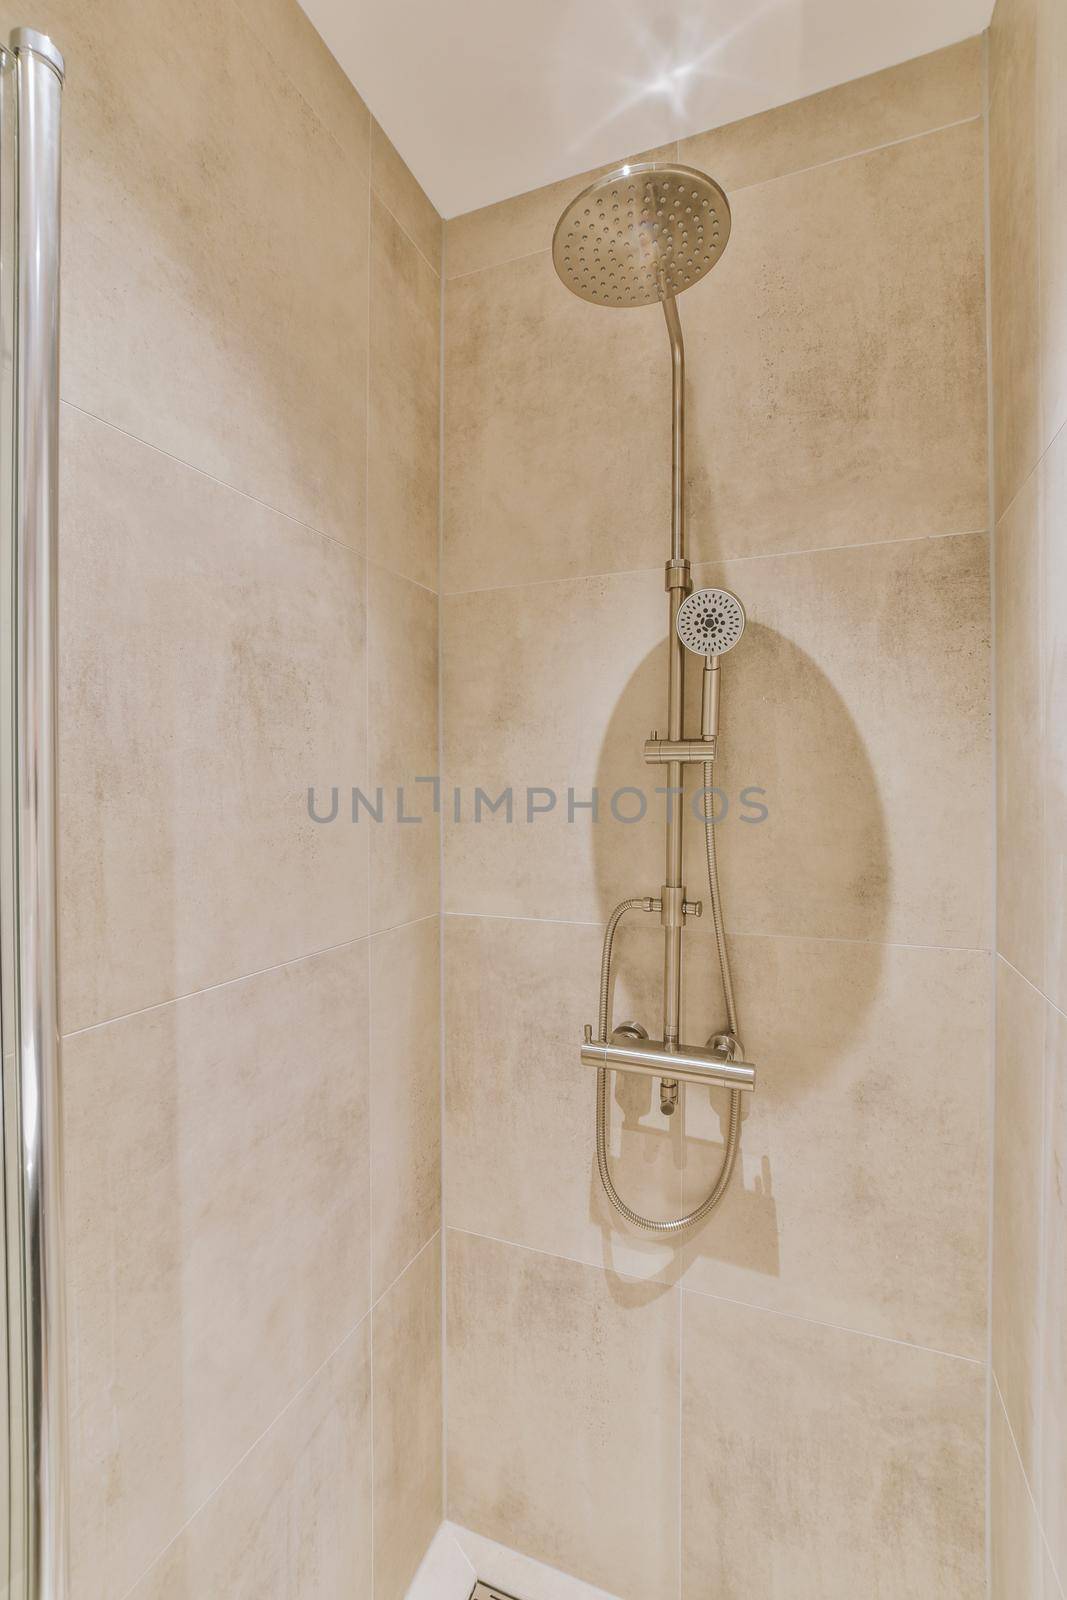 Shower tap and levers installed on beige marble wall in modern bathroom at home